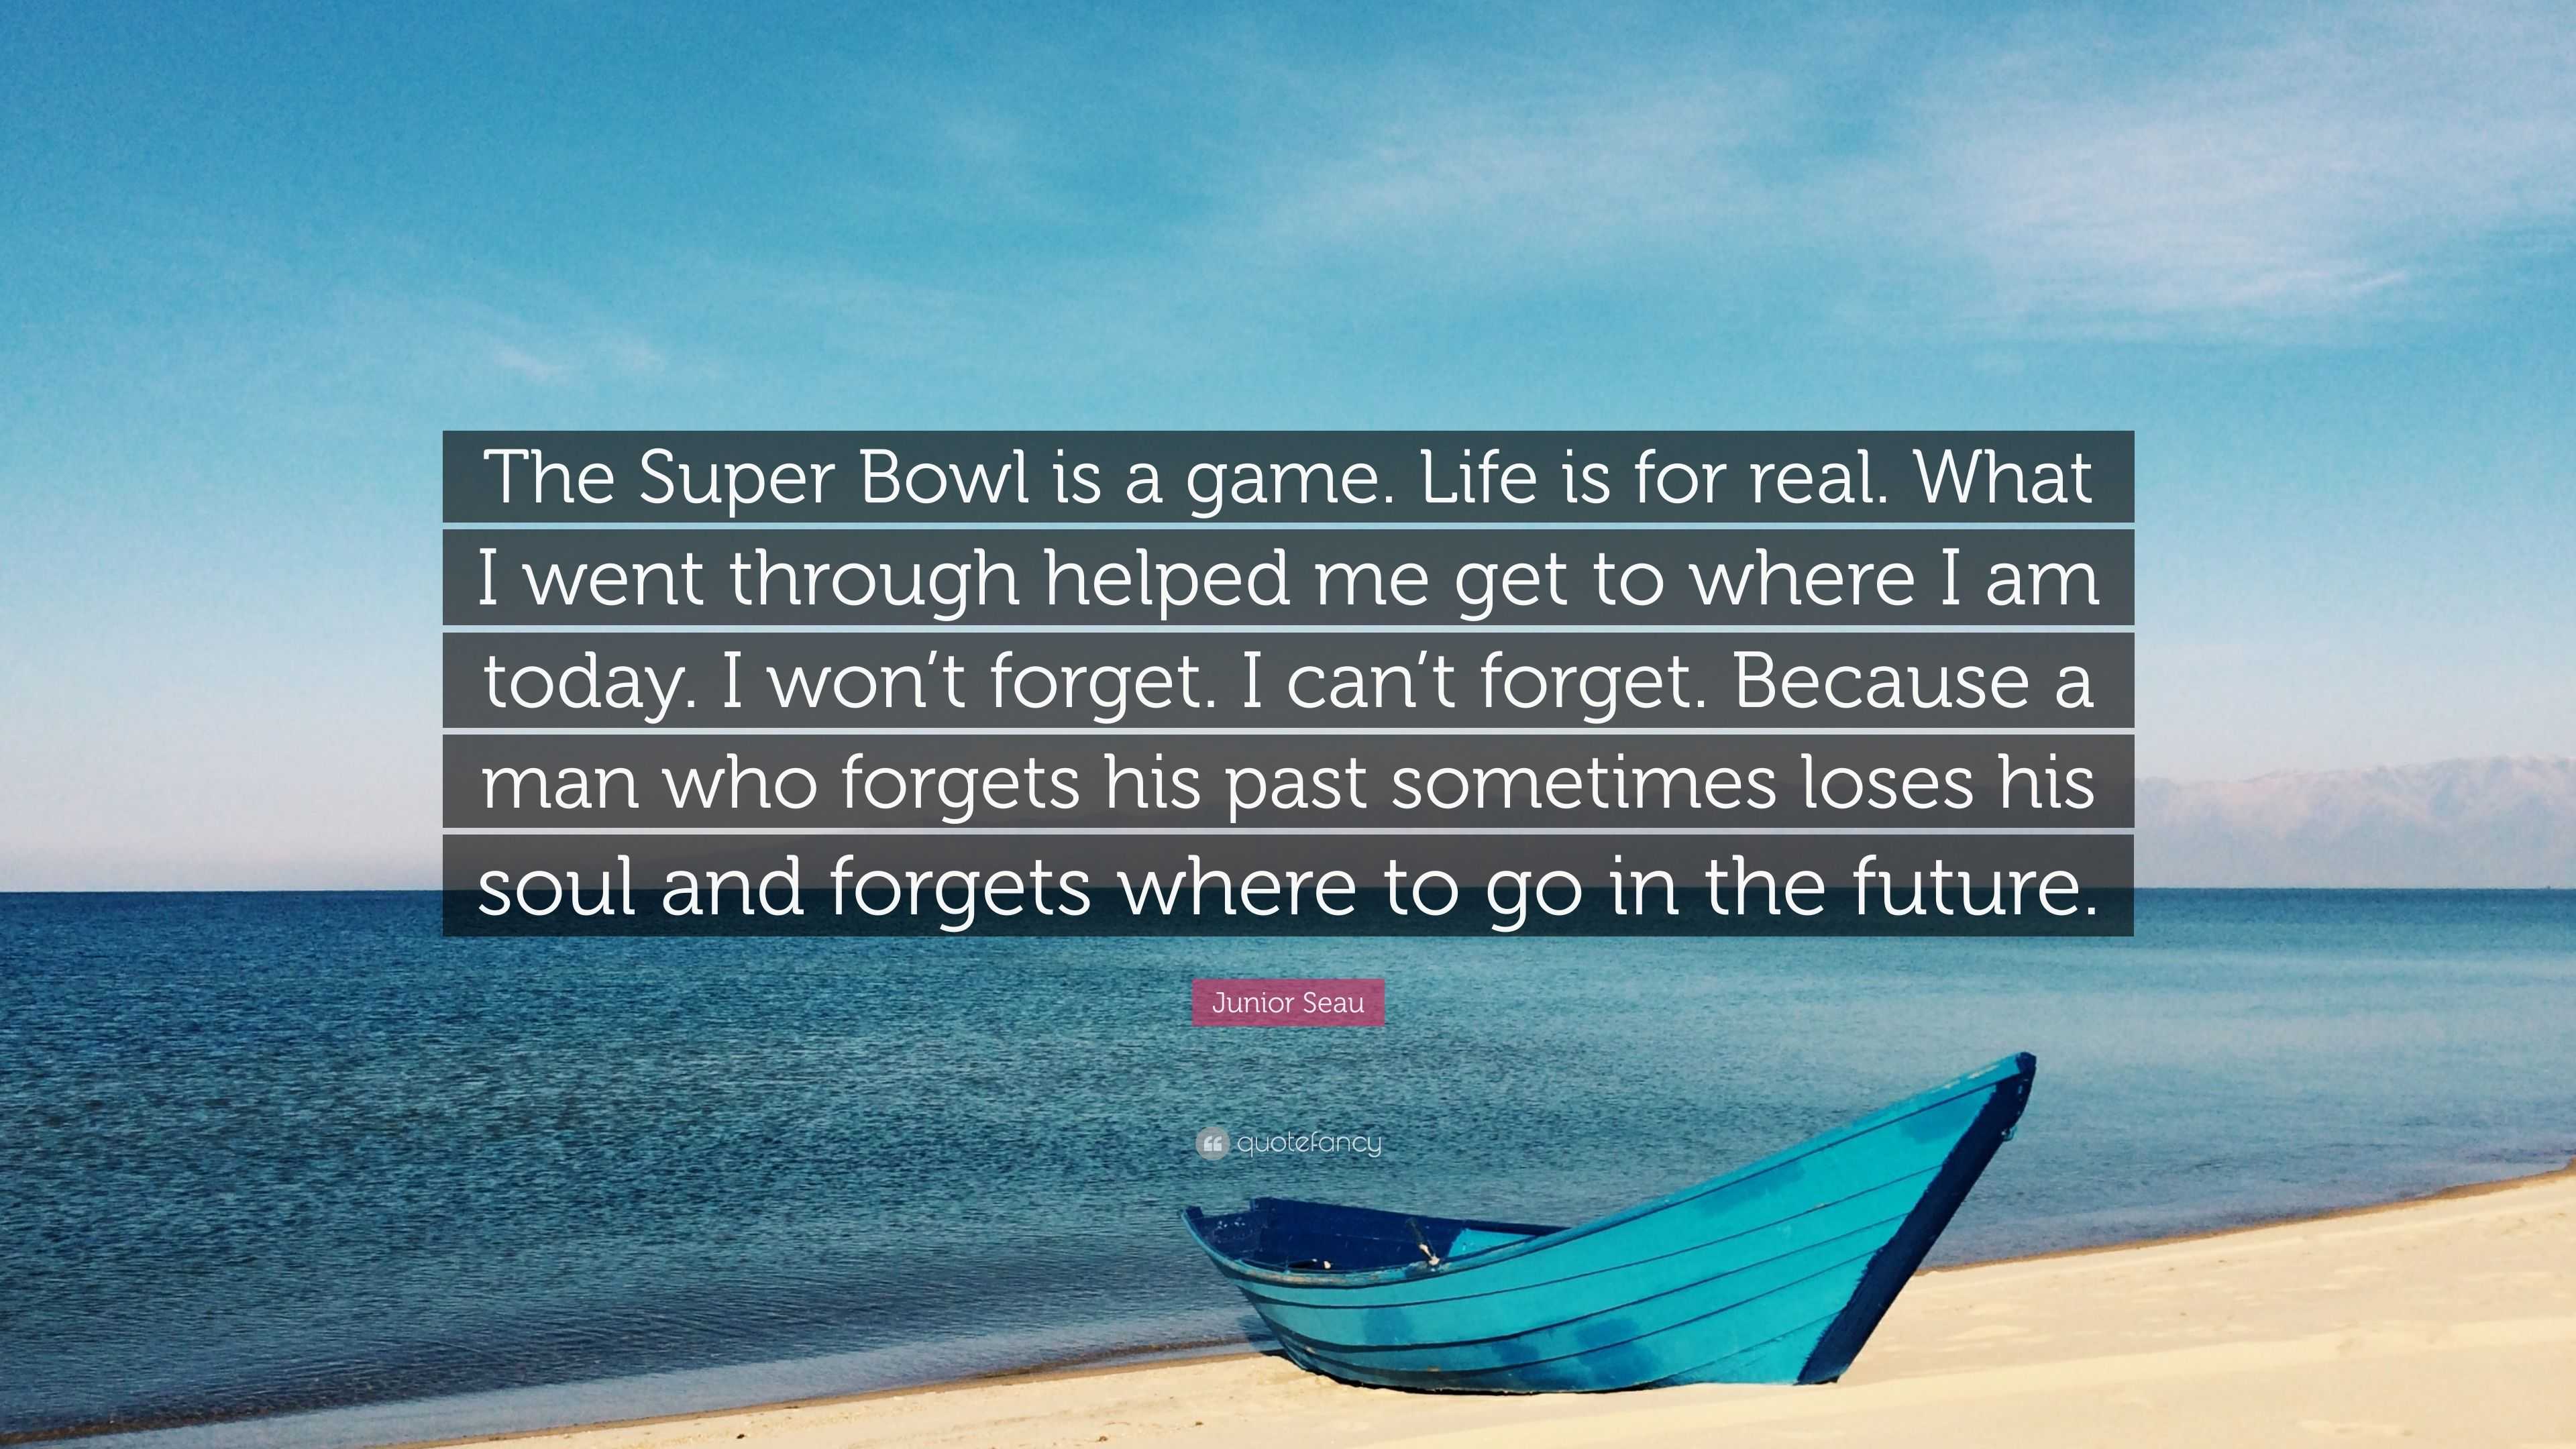 Junior Seau quote: The Super Bowl is a game. Life is for real